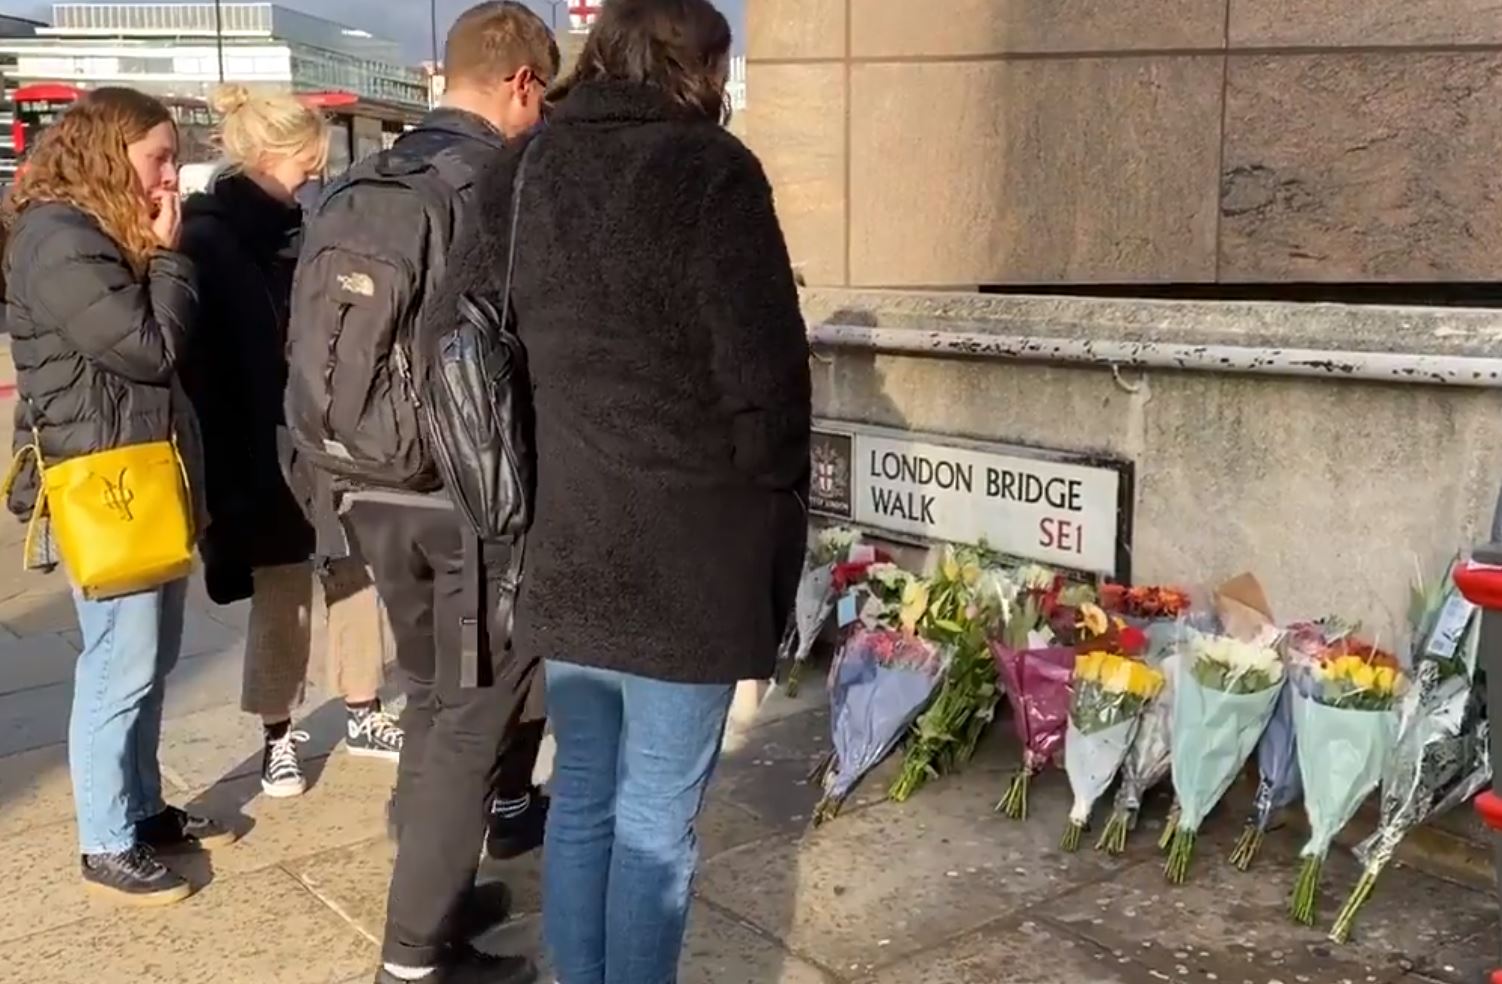 People have already laid flowers as near to the London Bridge attack site as is possible at this time